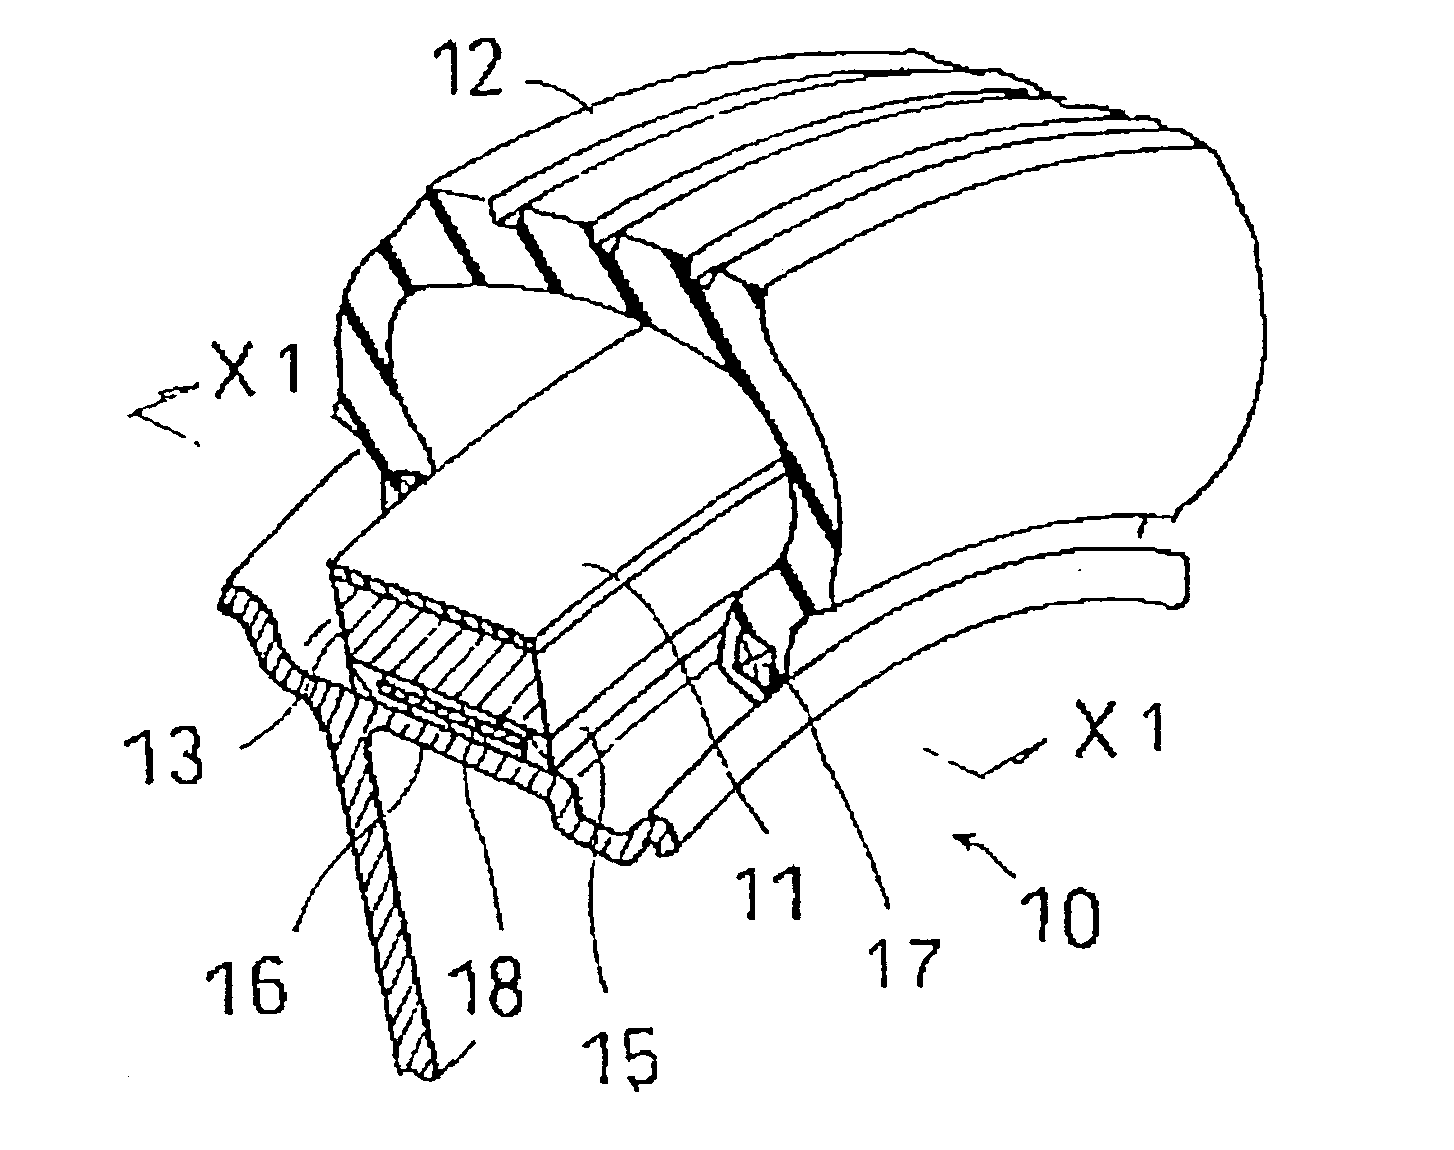 Run-Flat Tire Support, Manufacturing Method Therefor, and a Run-Flat Tire with the Run-Flat Tire Support Fixedly Mounted Thereto